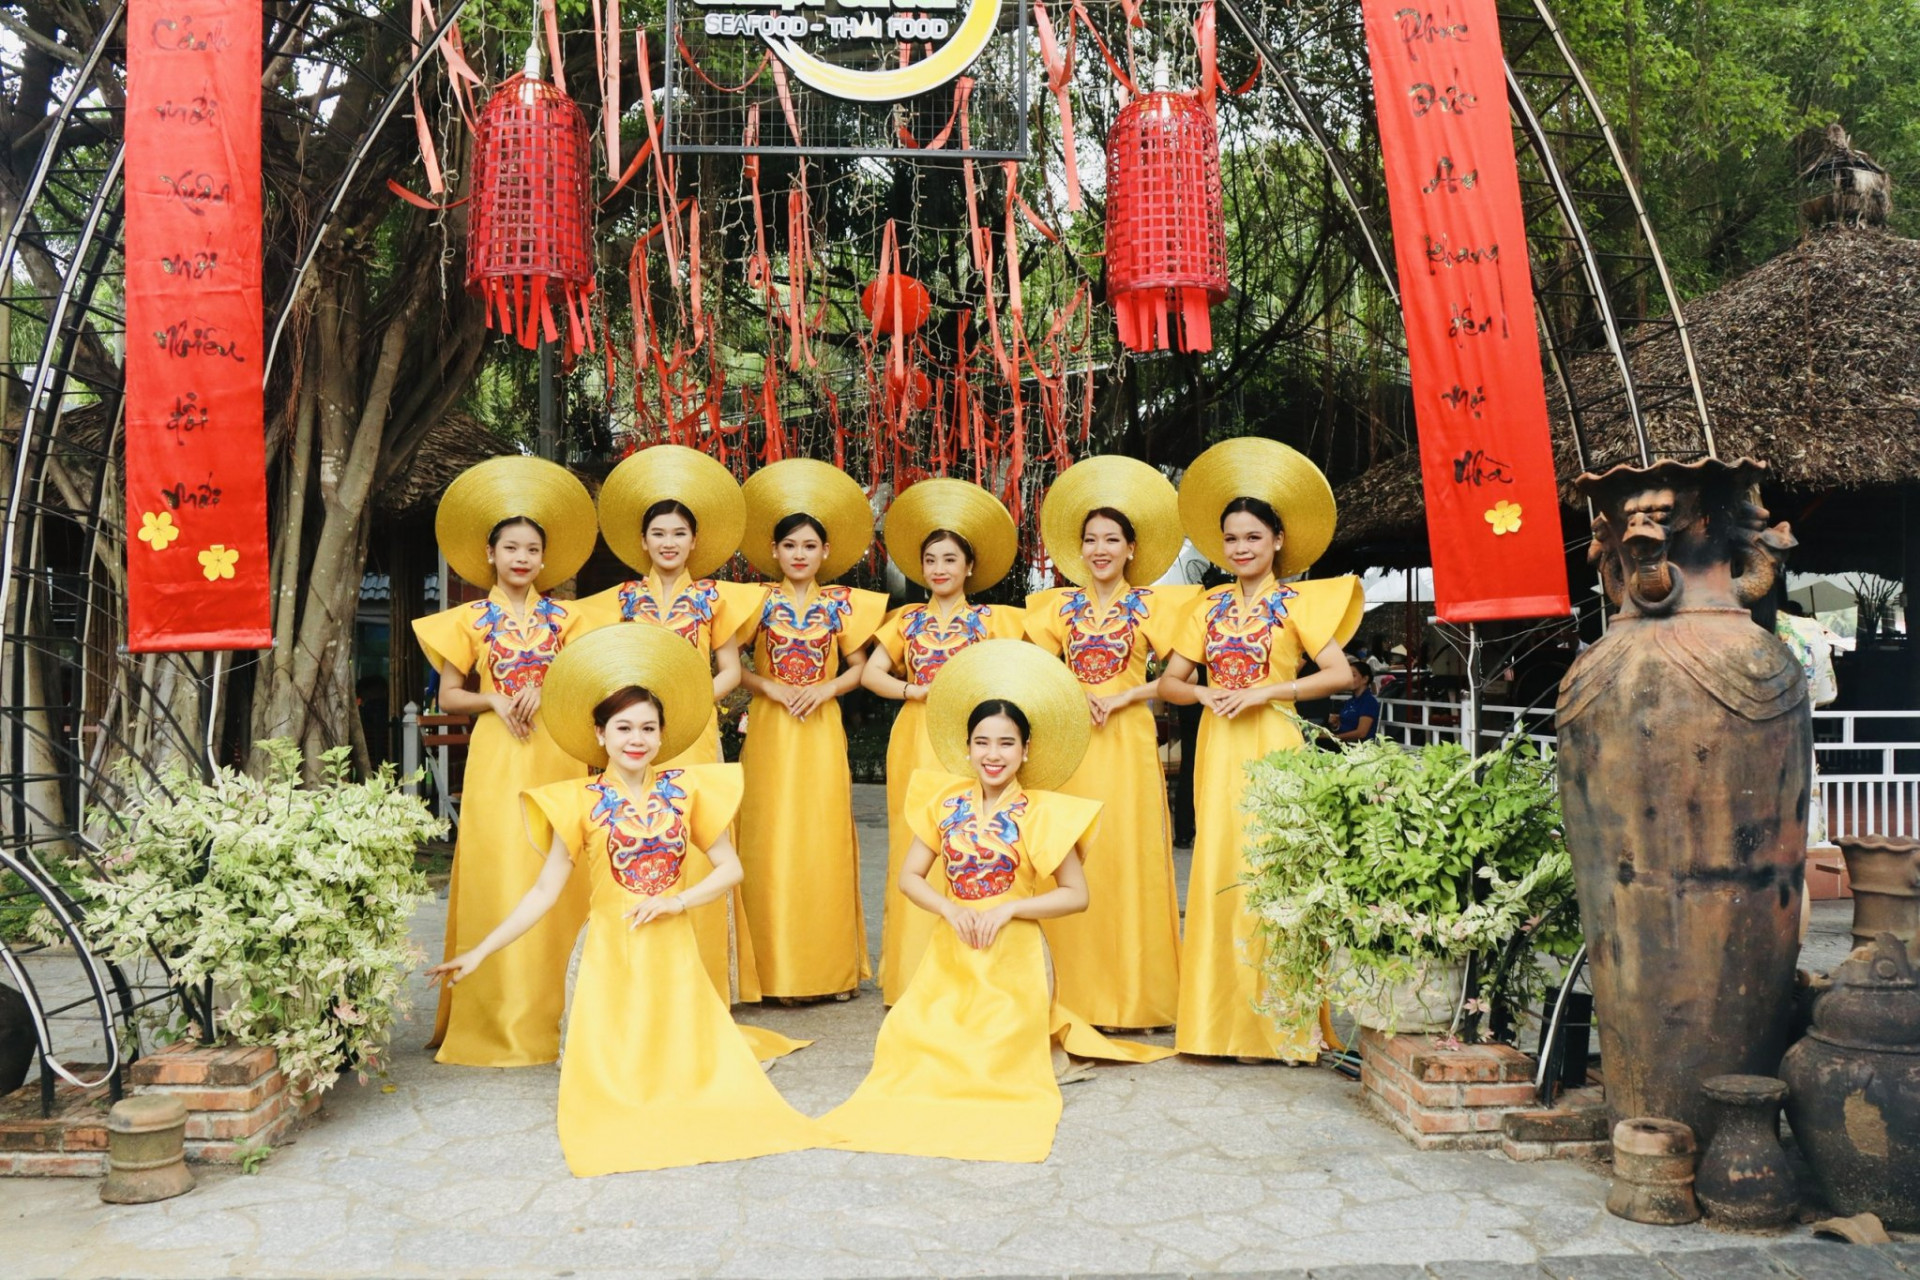 Dancers posing for photo on Lunar New Year occasion